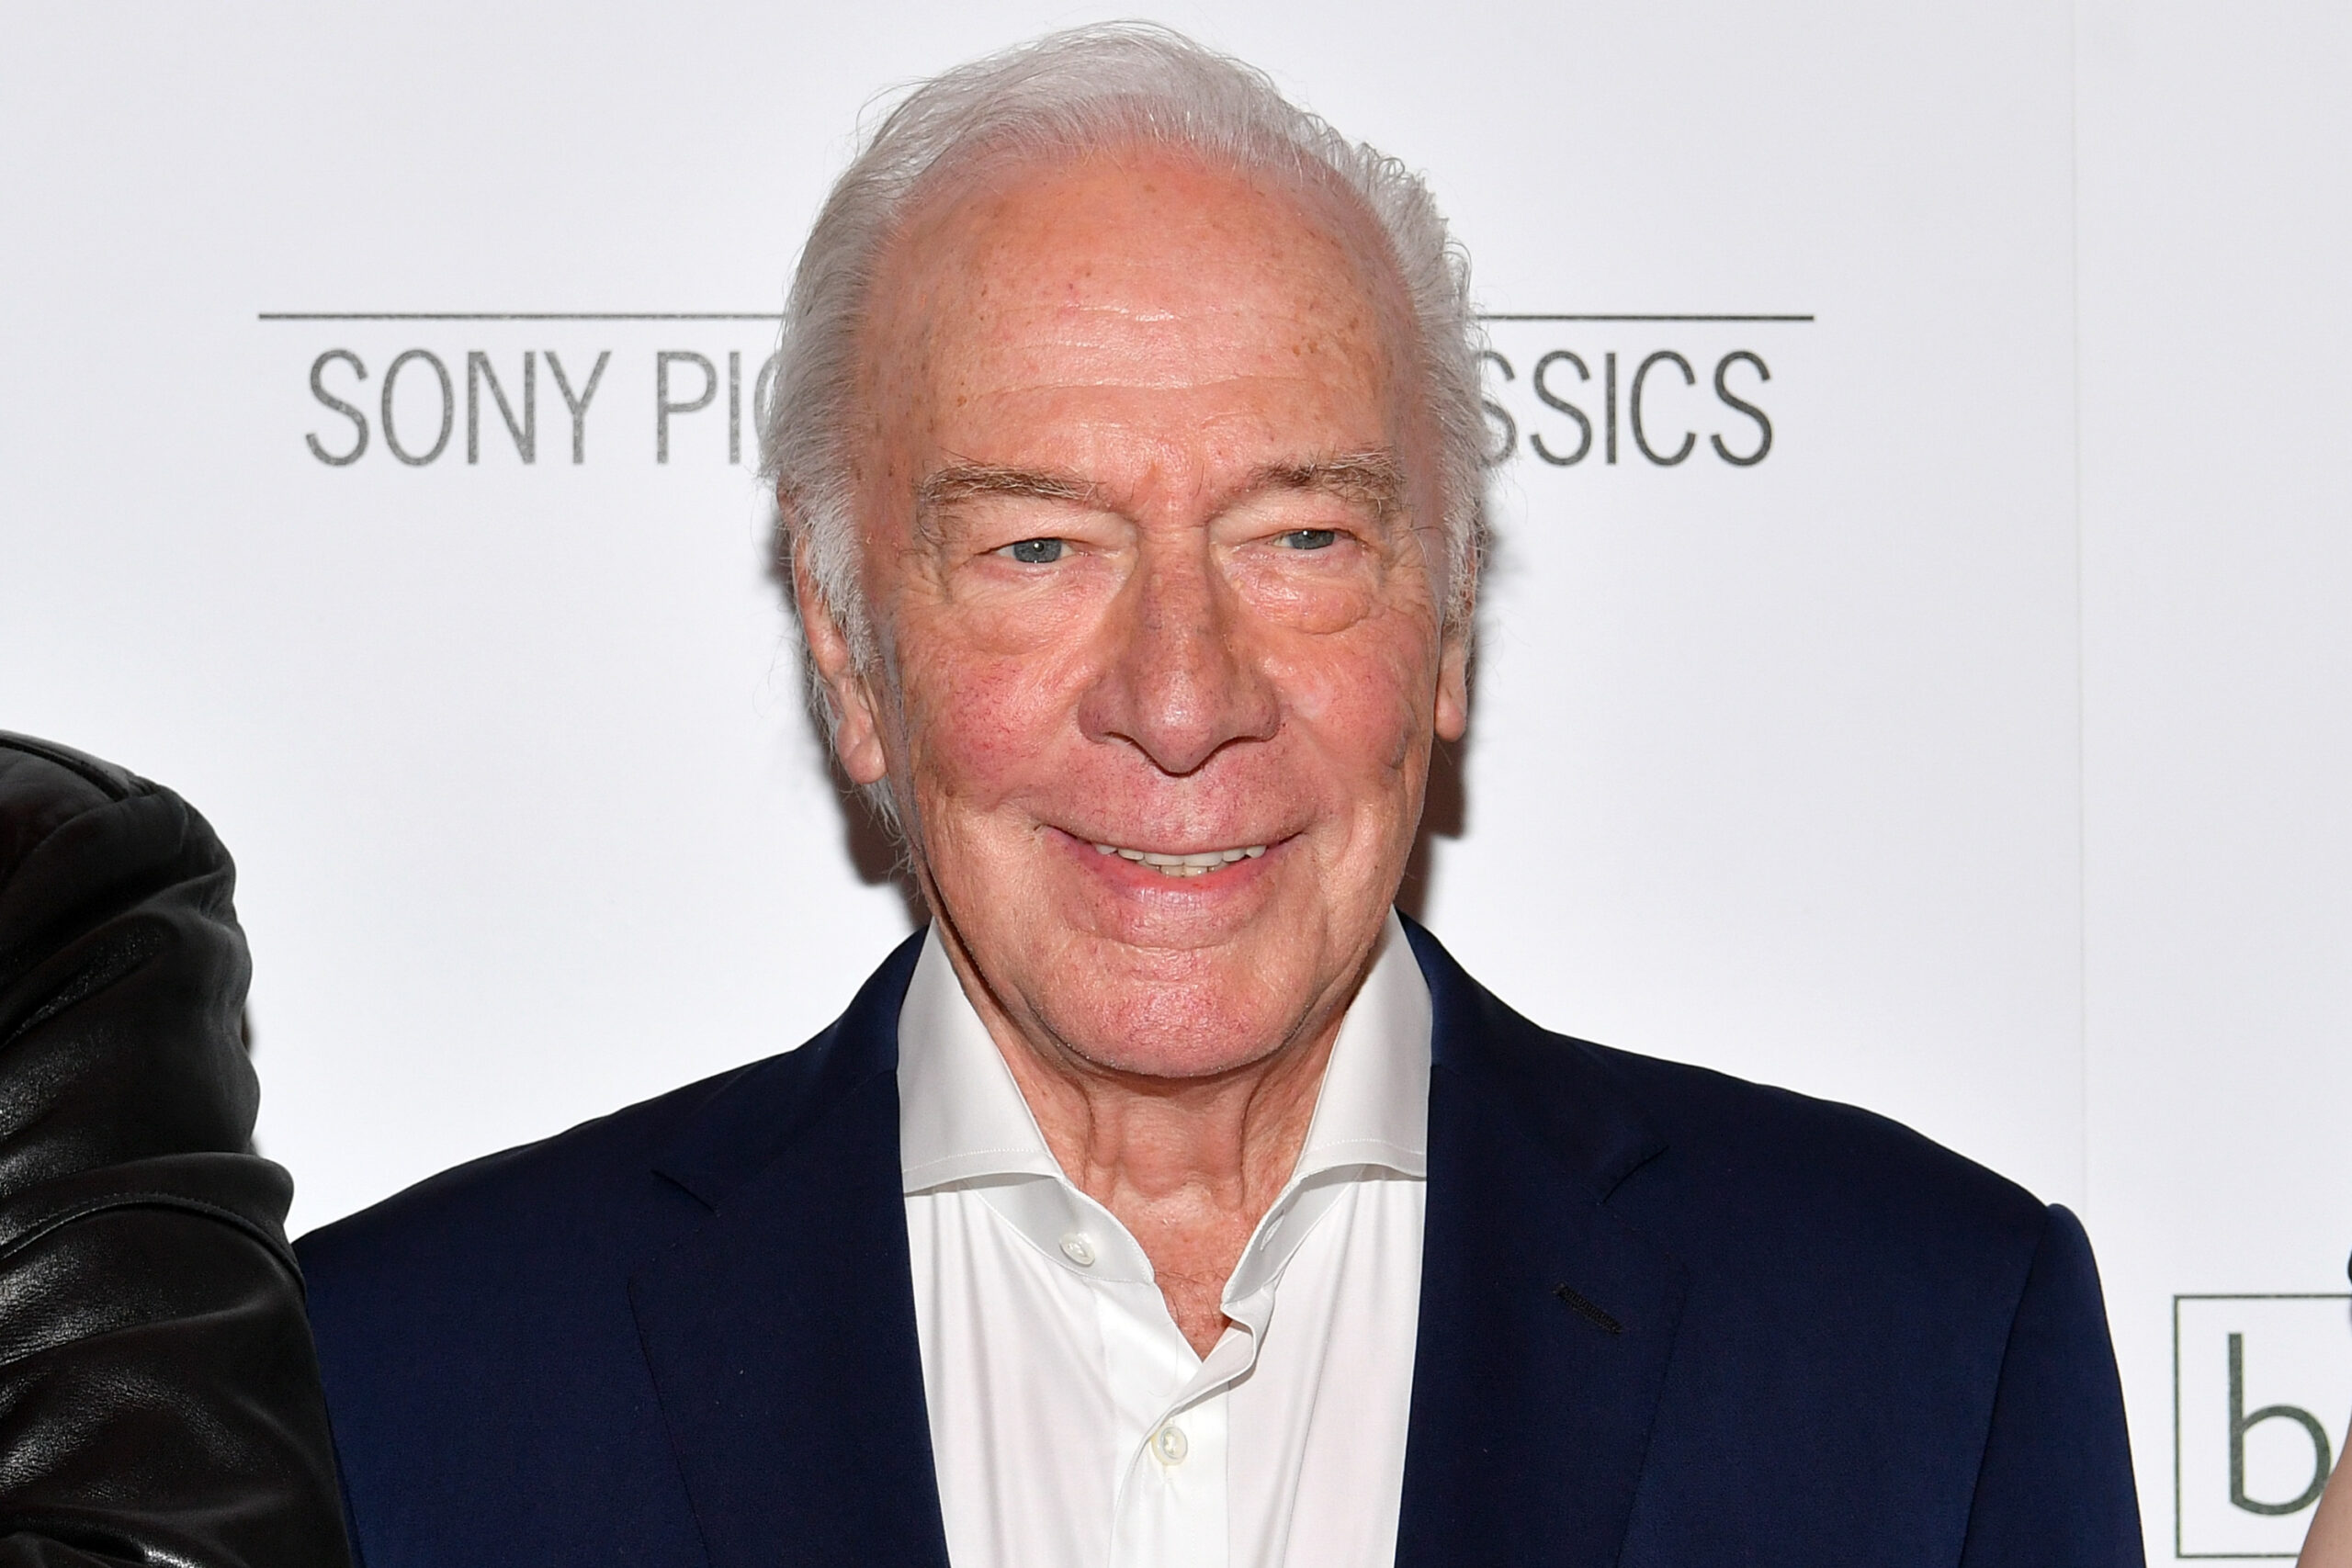 NEW YORK, NY - JUNE 11: Christopher Plummer attends the "Boundaries" New York screening at The Roxy Cinema on June 11, 2018 in New York City. (Photo by Dia Dipasupil/Getty Images)